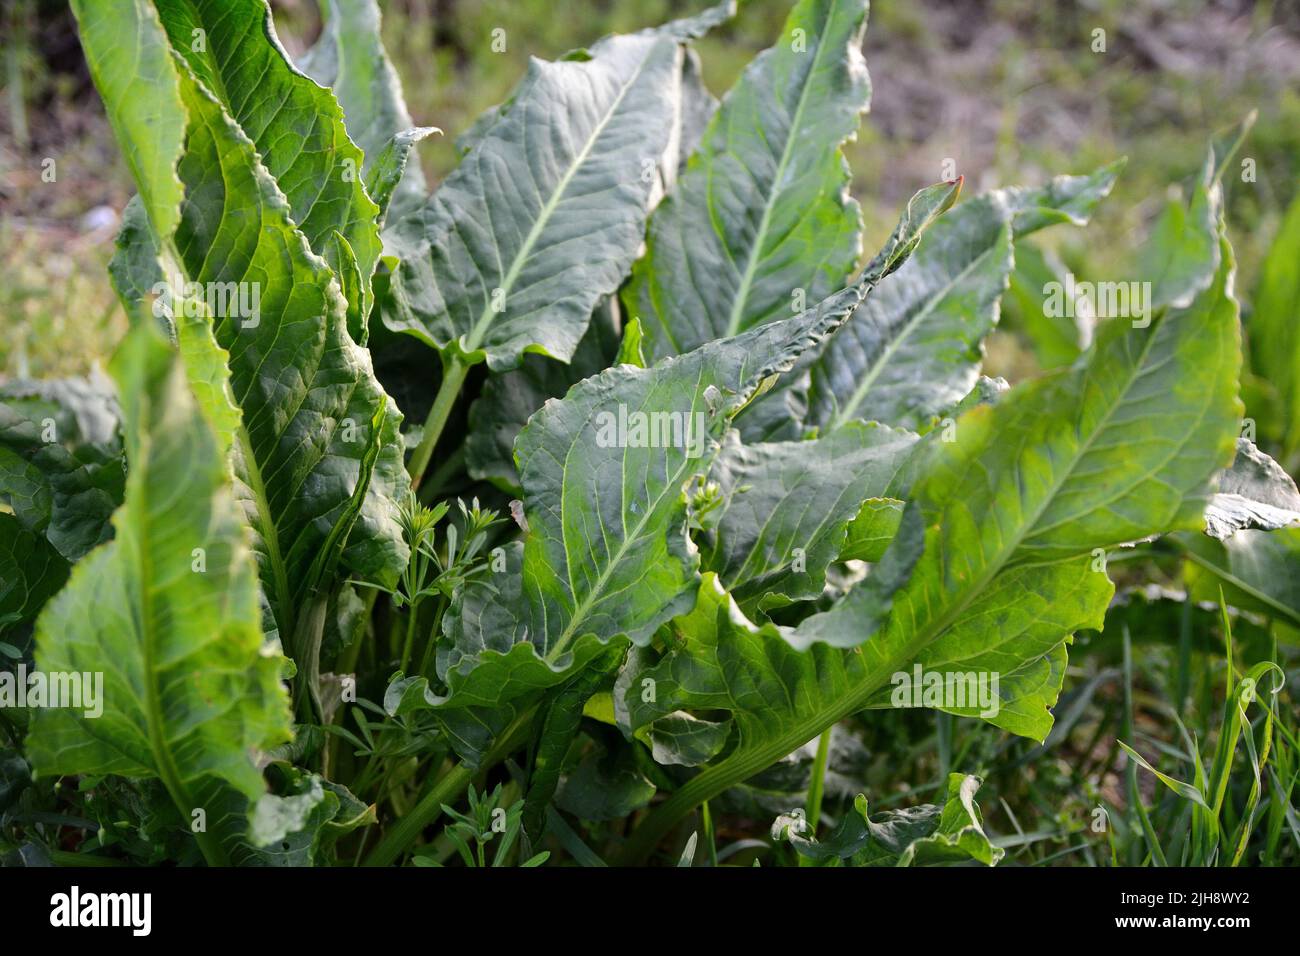 Food from nature. Rumex patientia, known as patience dock, garden patience, herb patience, or monk's rhubarb, is a herbaceous perennial plant. Stock Photo